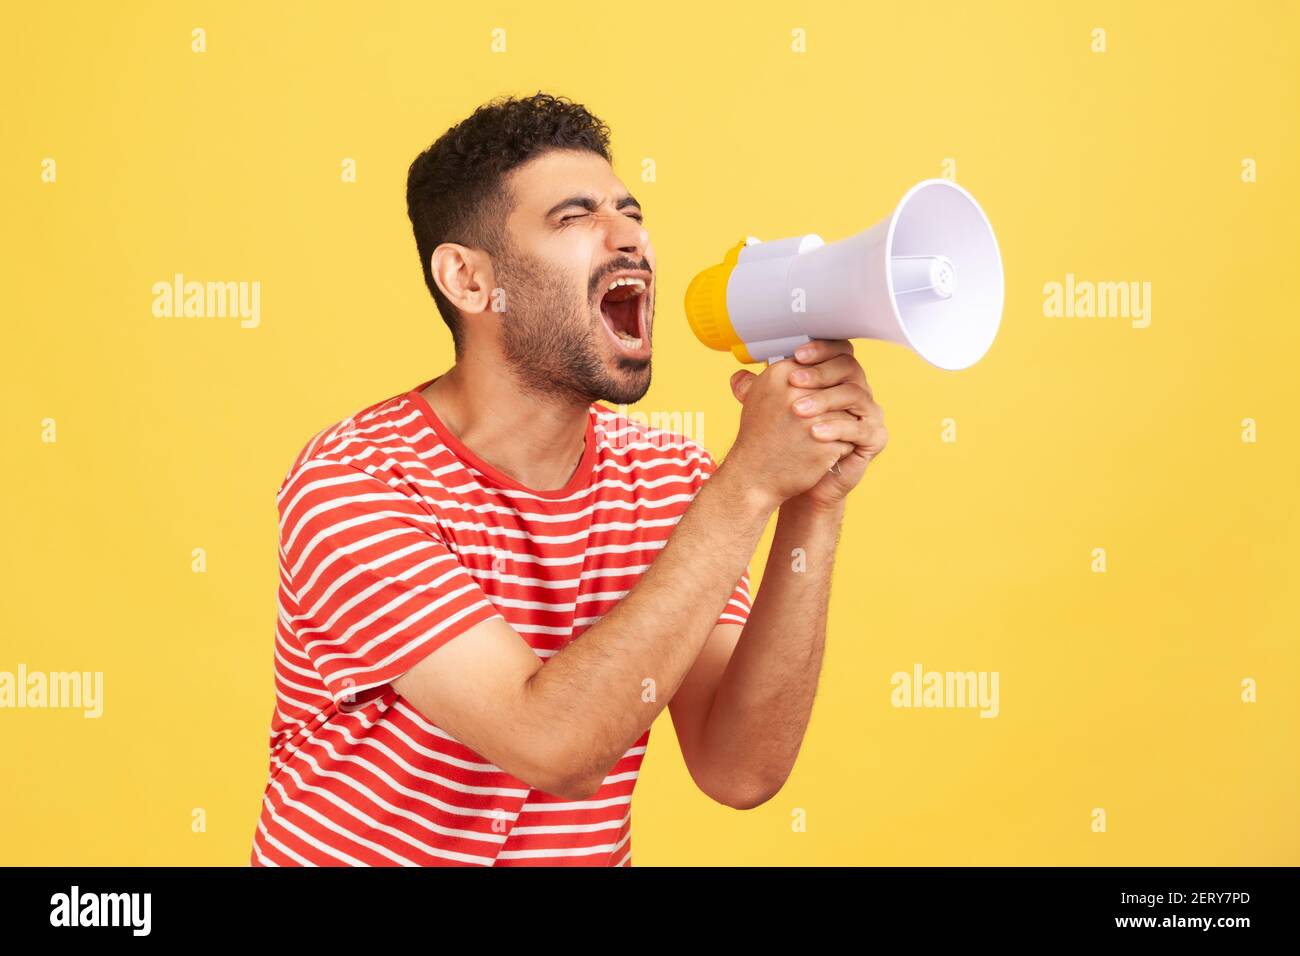 Angry nervous man with beard in striped t-shirt loudly screaming at megaphone, making announce, protesting, wants to be heard. Indoor studio shot isol Stock Photo